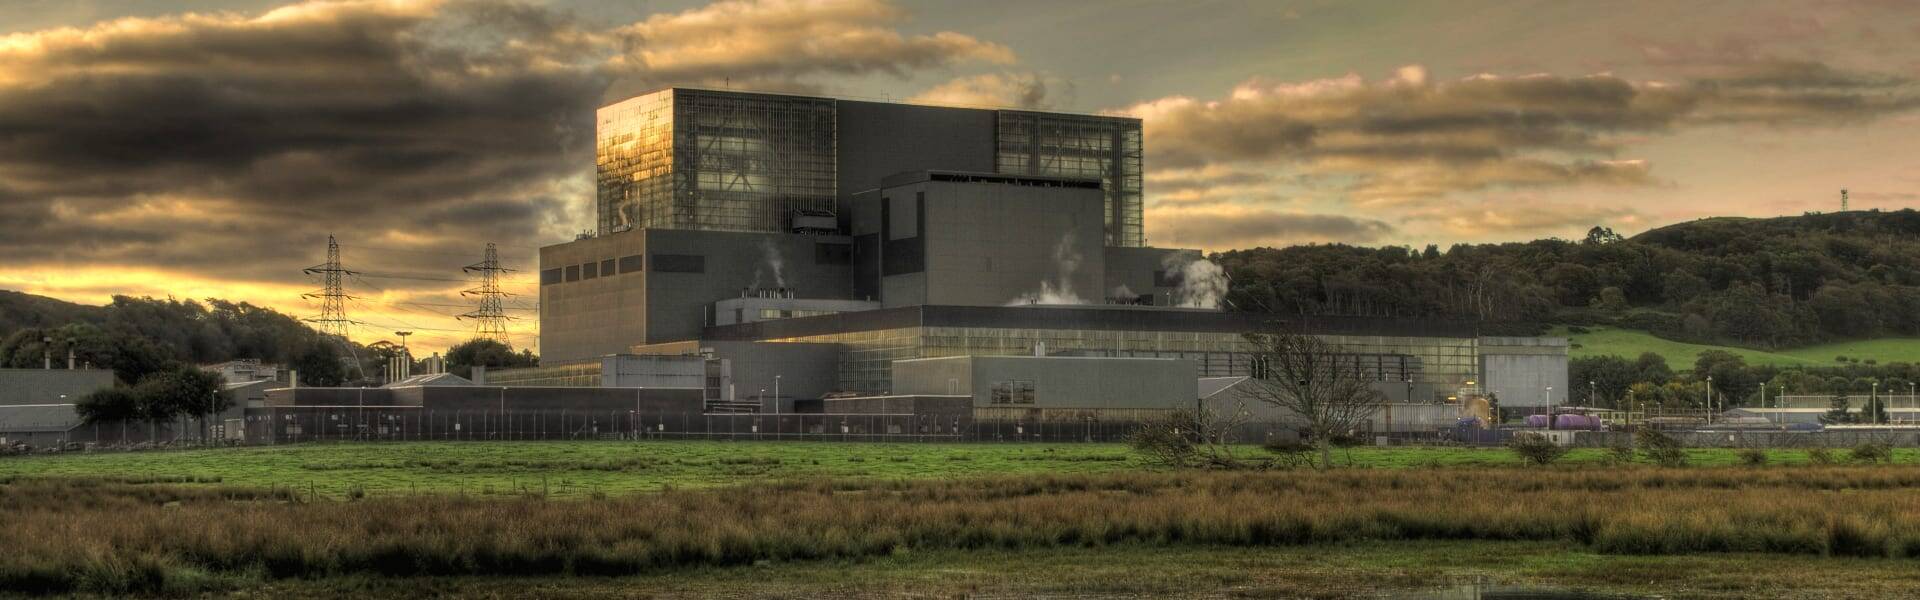 GBN chair: Planning rules put nuclear target at risk